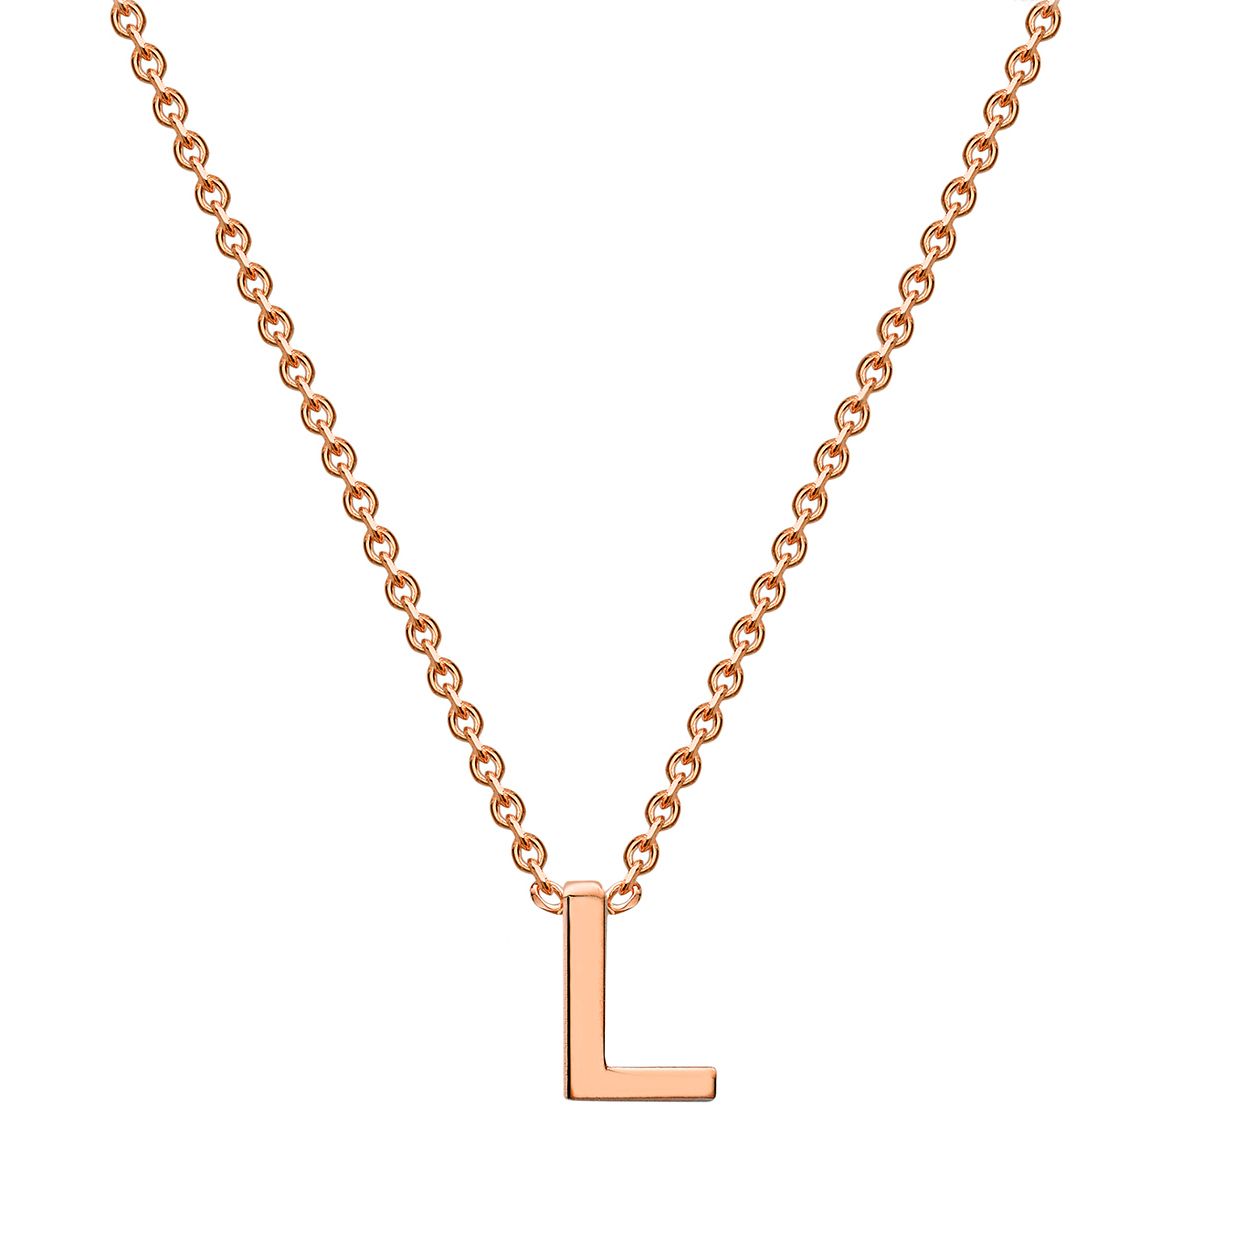 9CT ROSE GOLD INITIAL NECKLACE